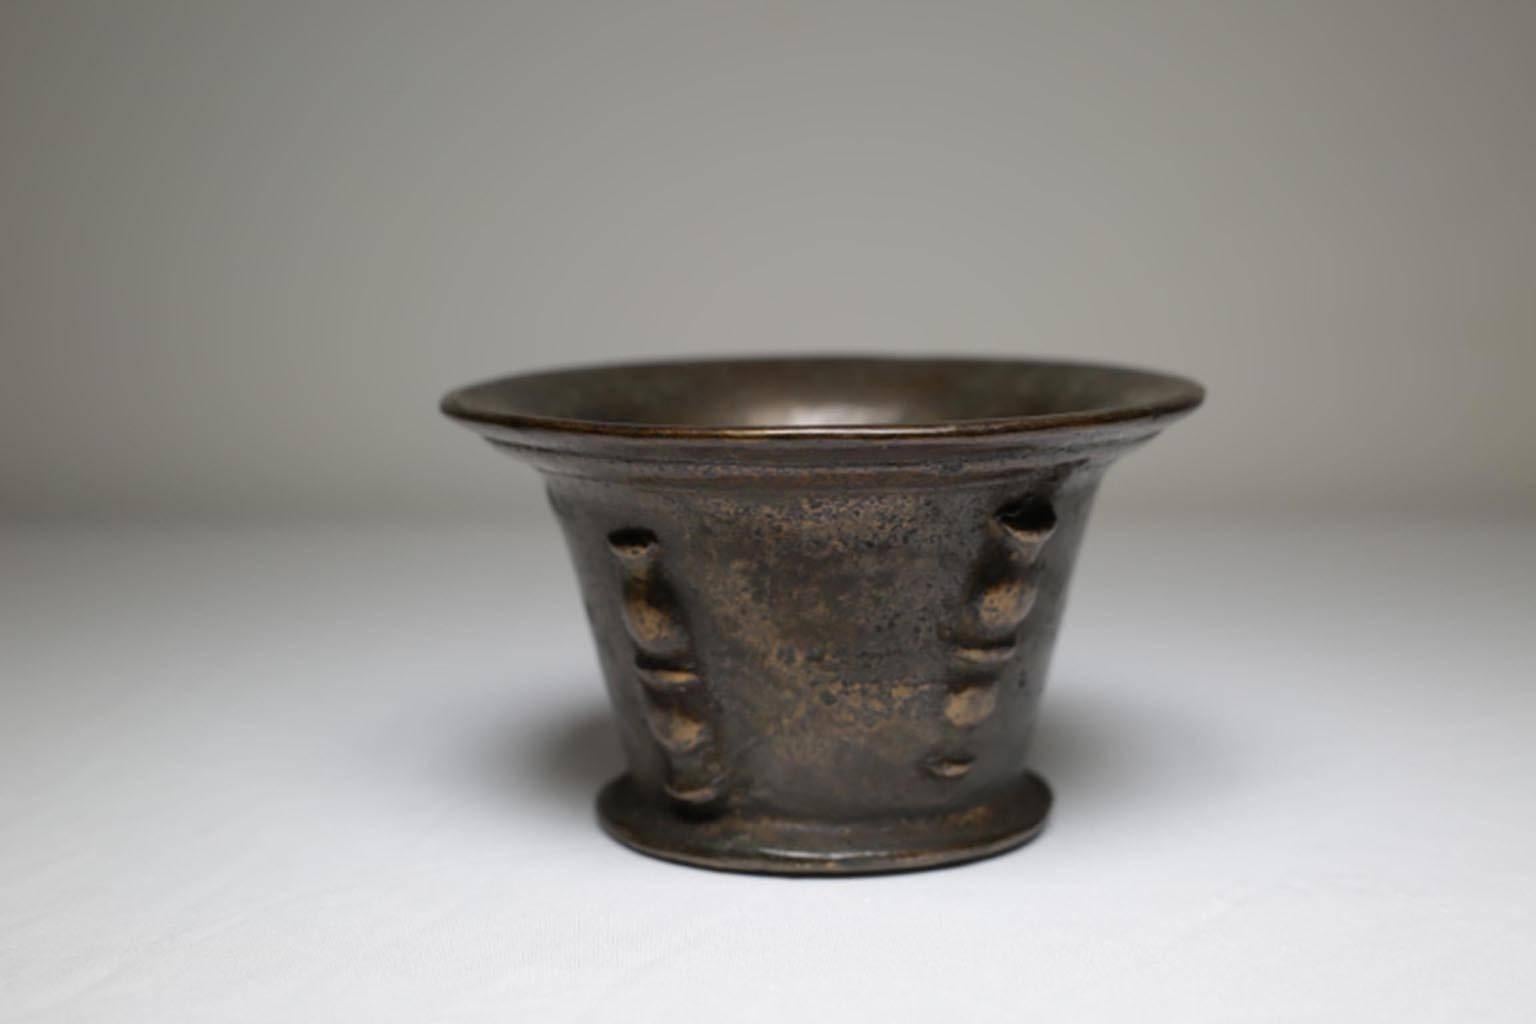 Industrial Late 16th-Early 17 Century Spanish Bronze Mortar, circa 1580s-1640s